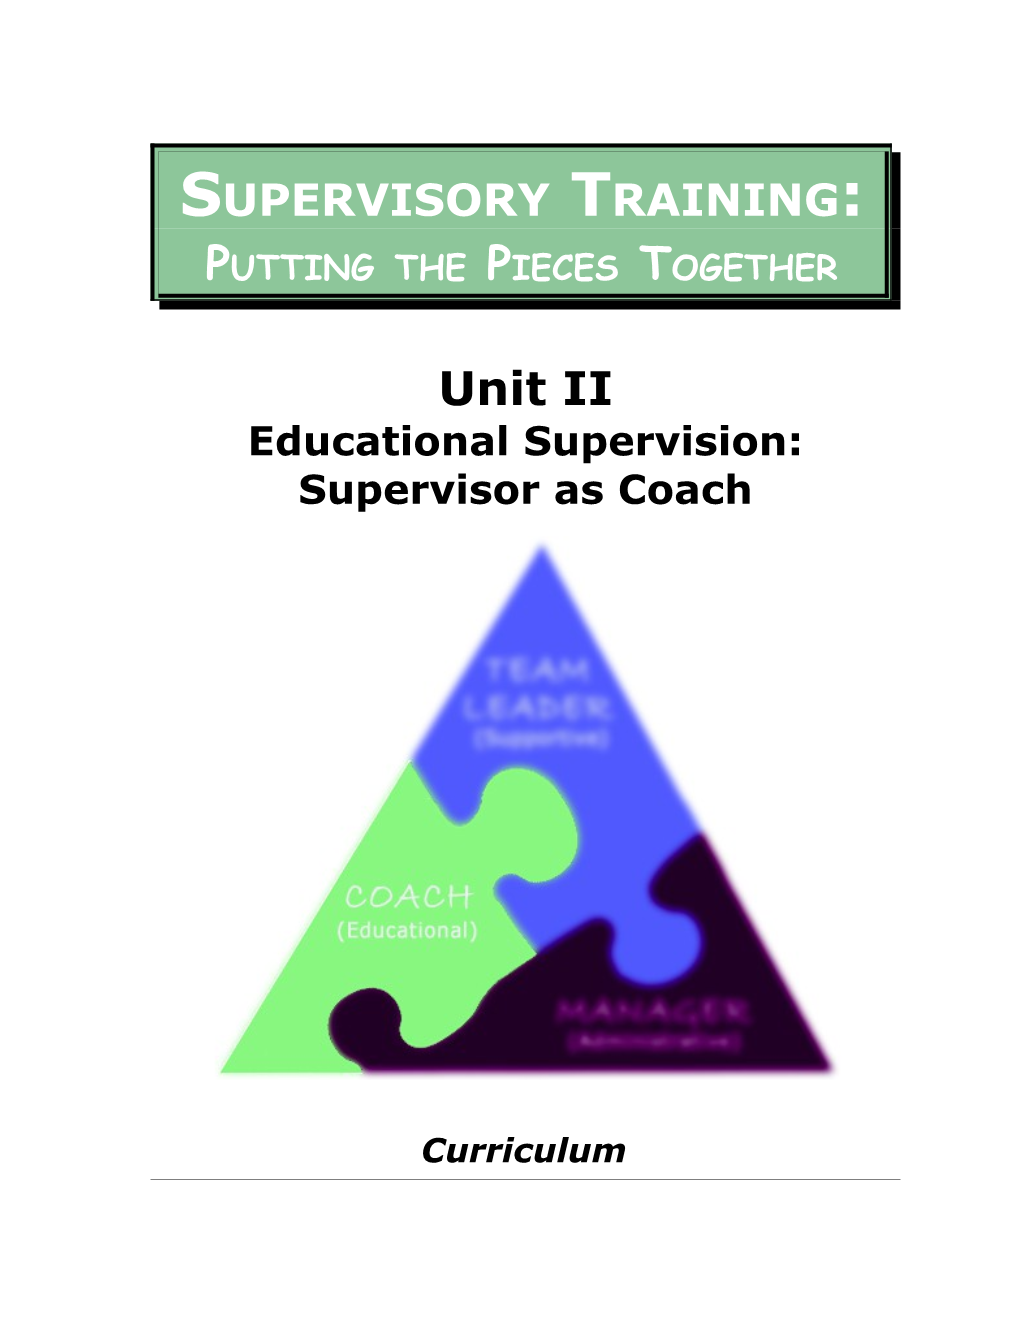 Unit Ii: Educational and Case Consultation Supervision